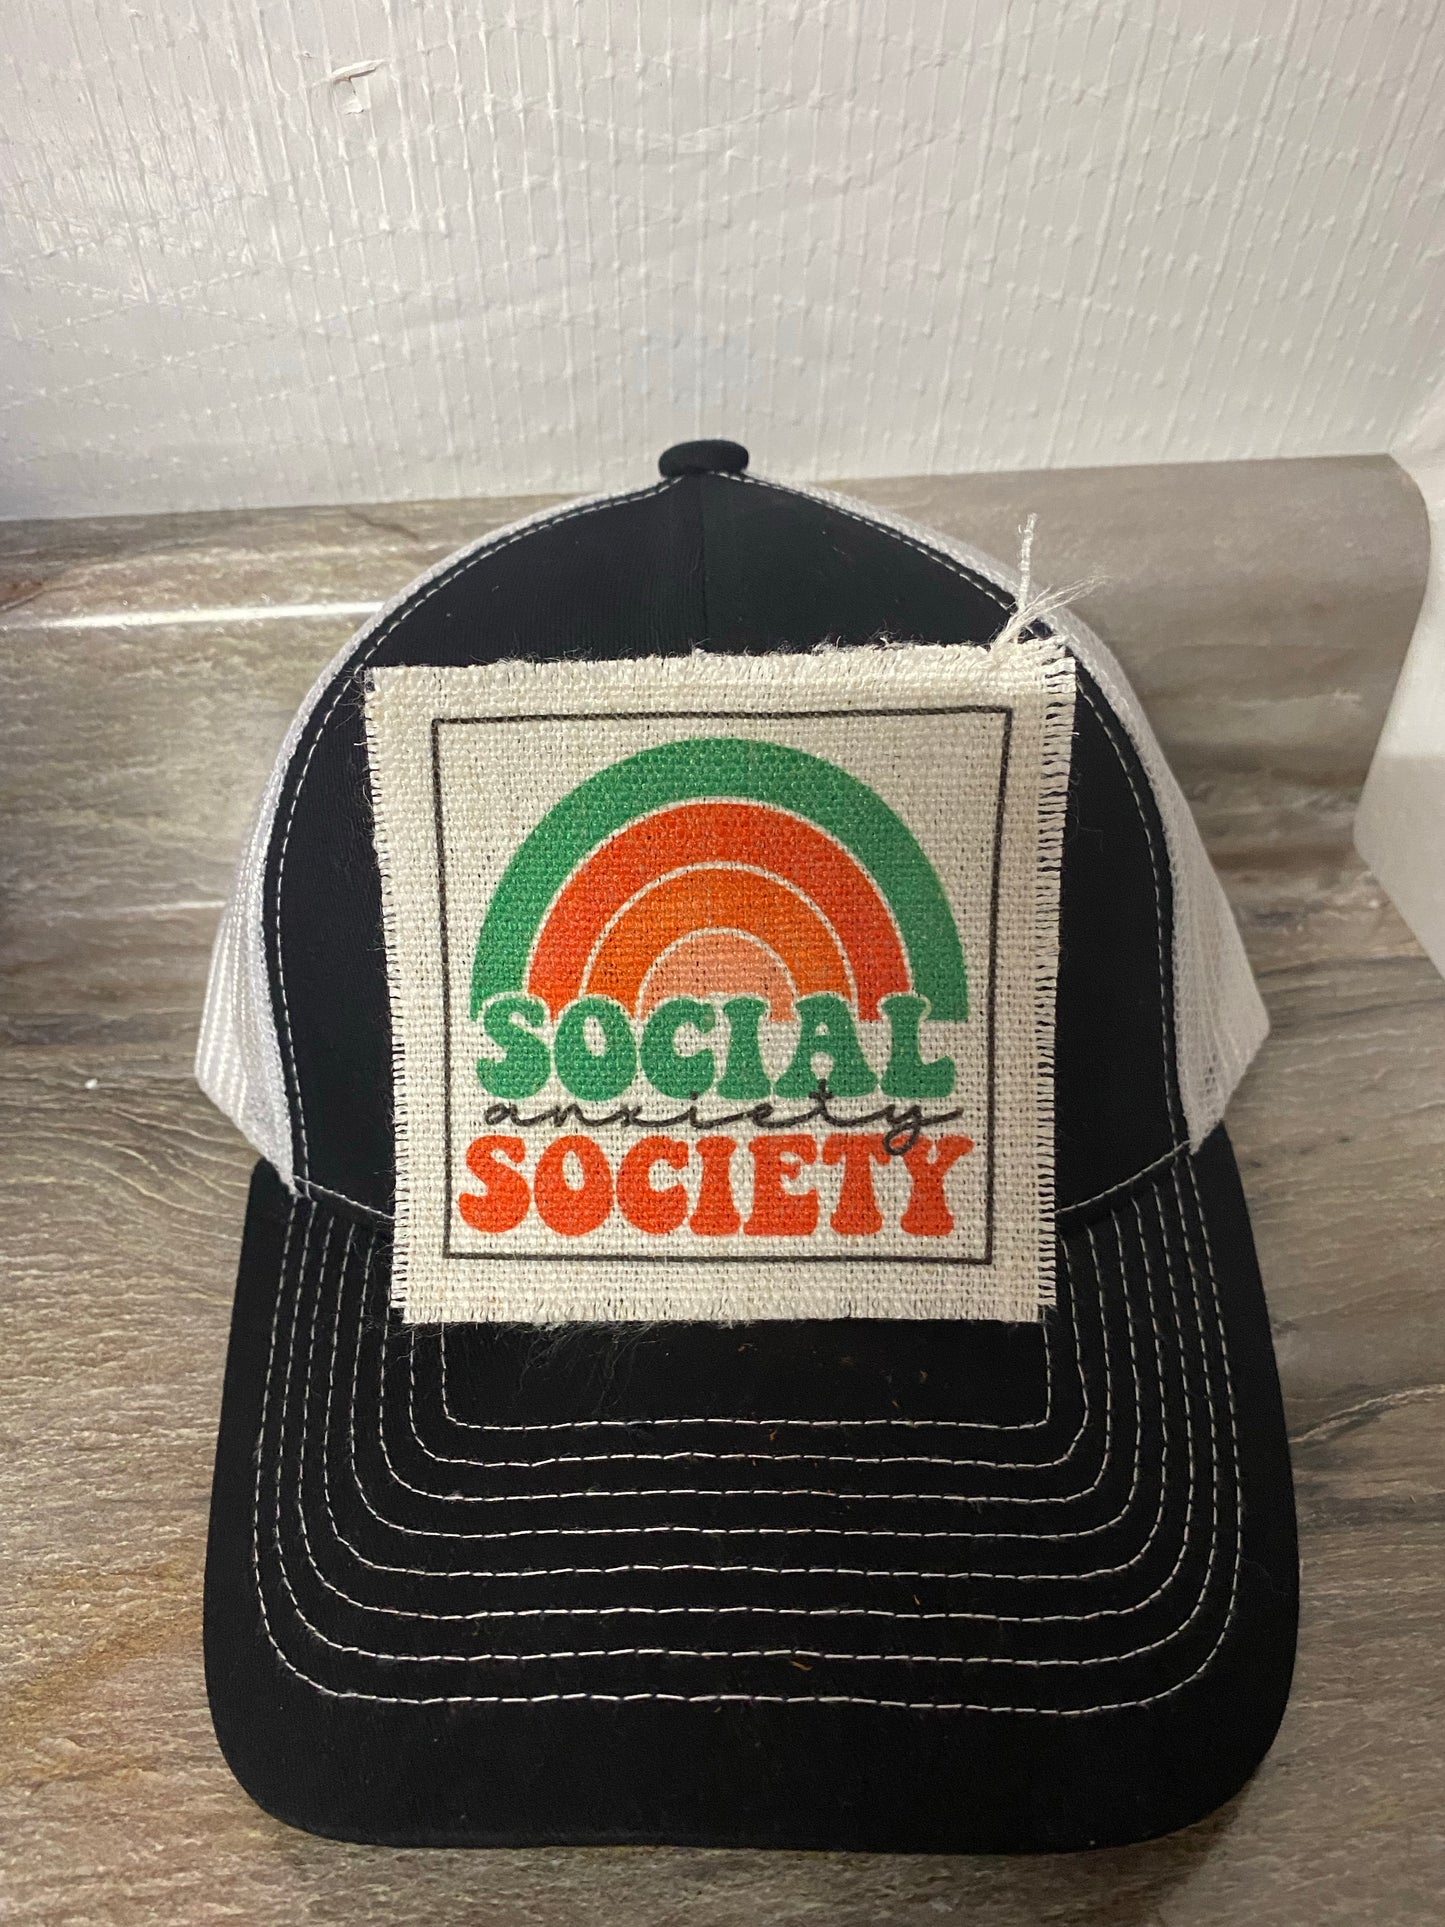 Social Anxiety Society Hat Patch